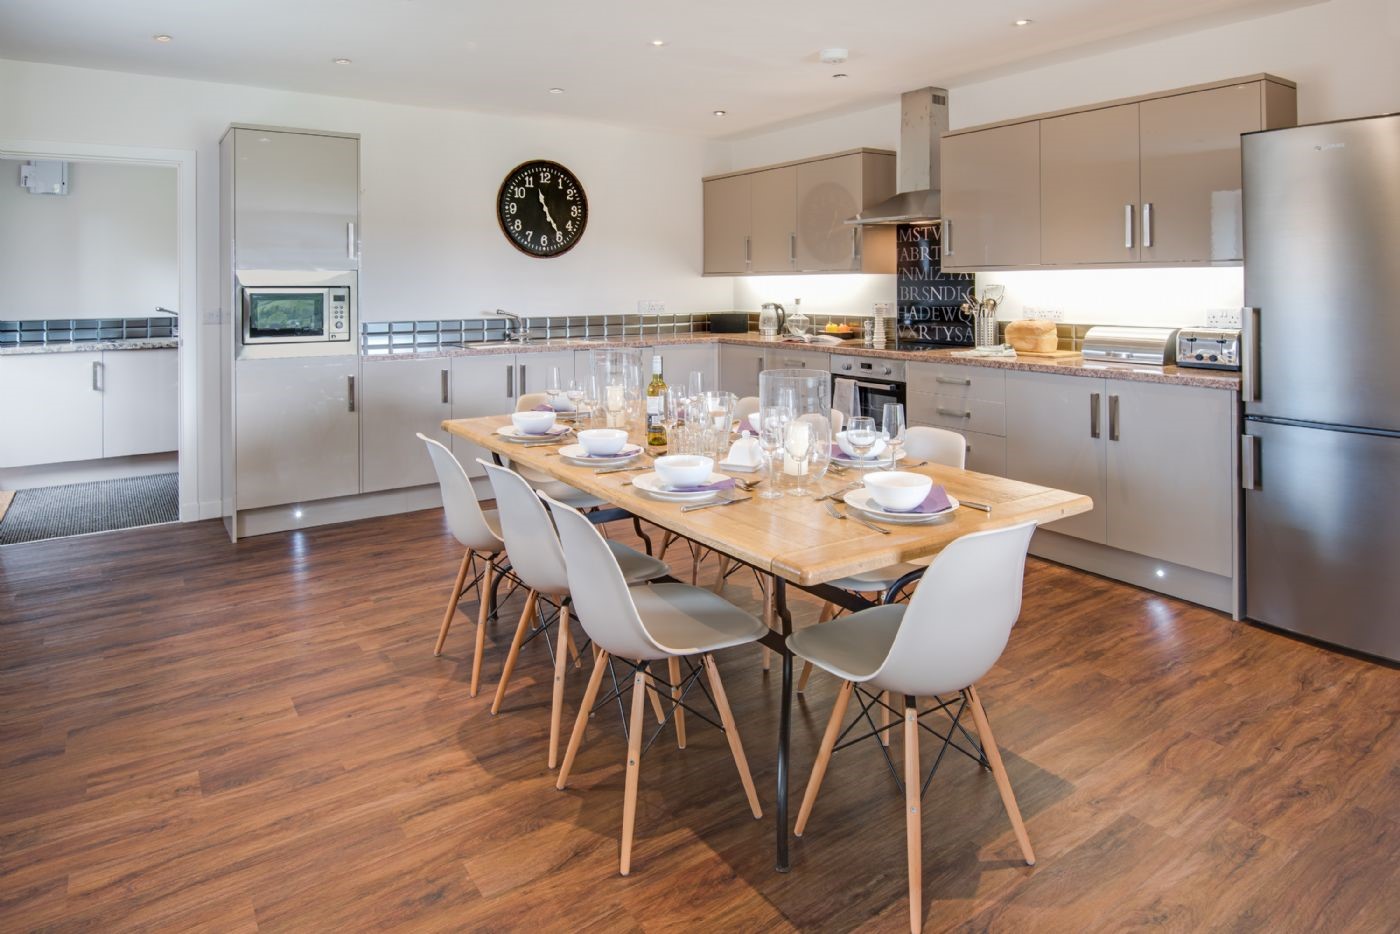 Granary - stylish kitchen with dining space for eight guests